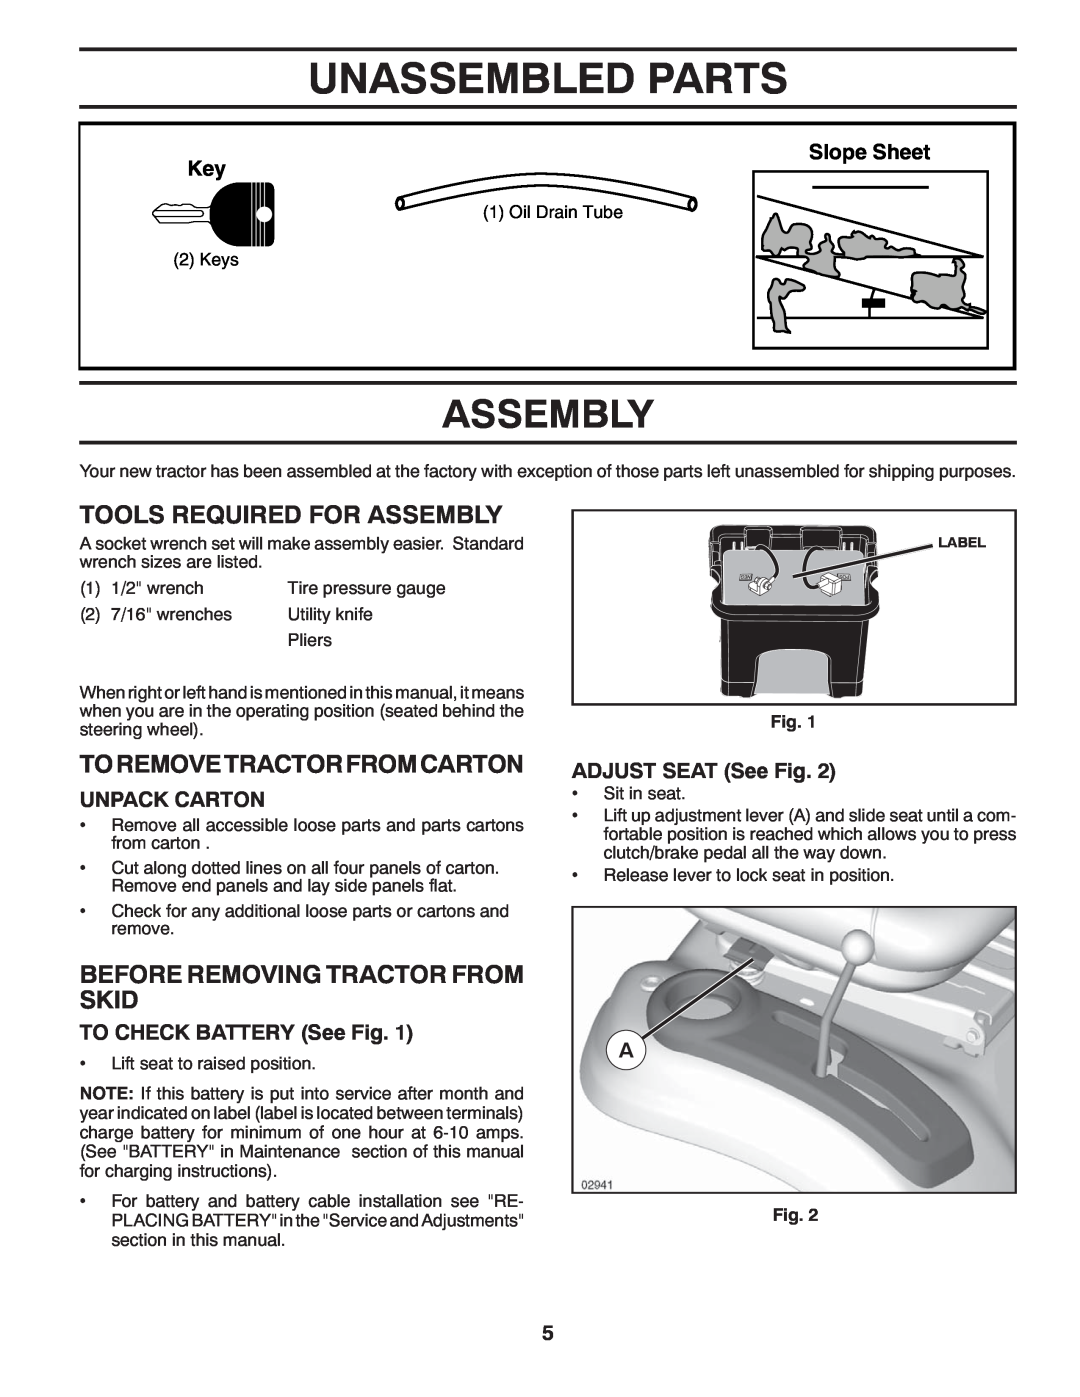 McCulloch MC2042YT (96042011500) manual Unassembled Parts, Tools Required For Assembly, Toremovetractorfromcarton 